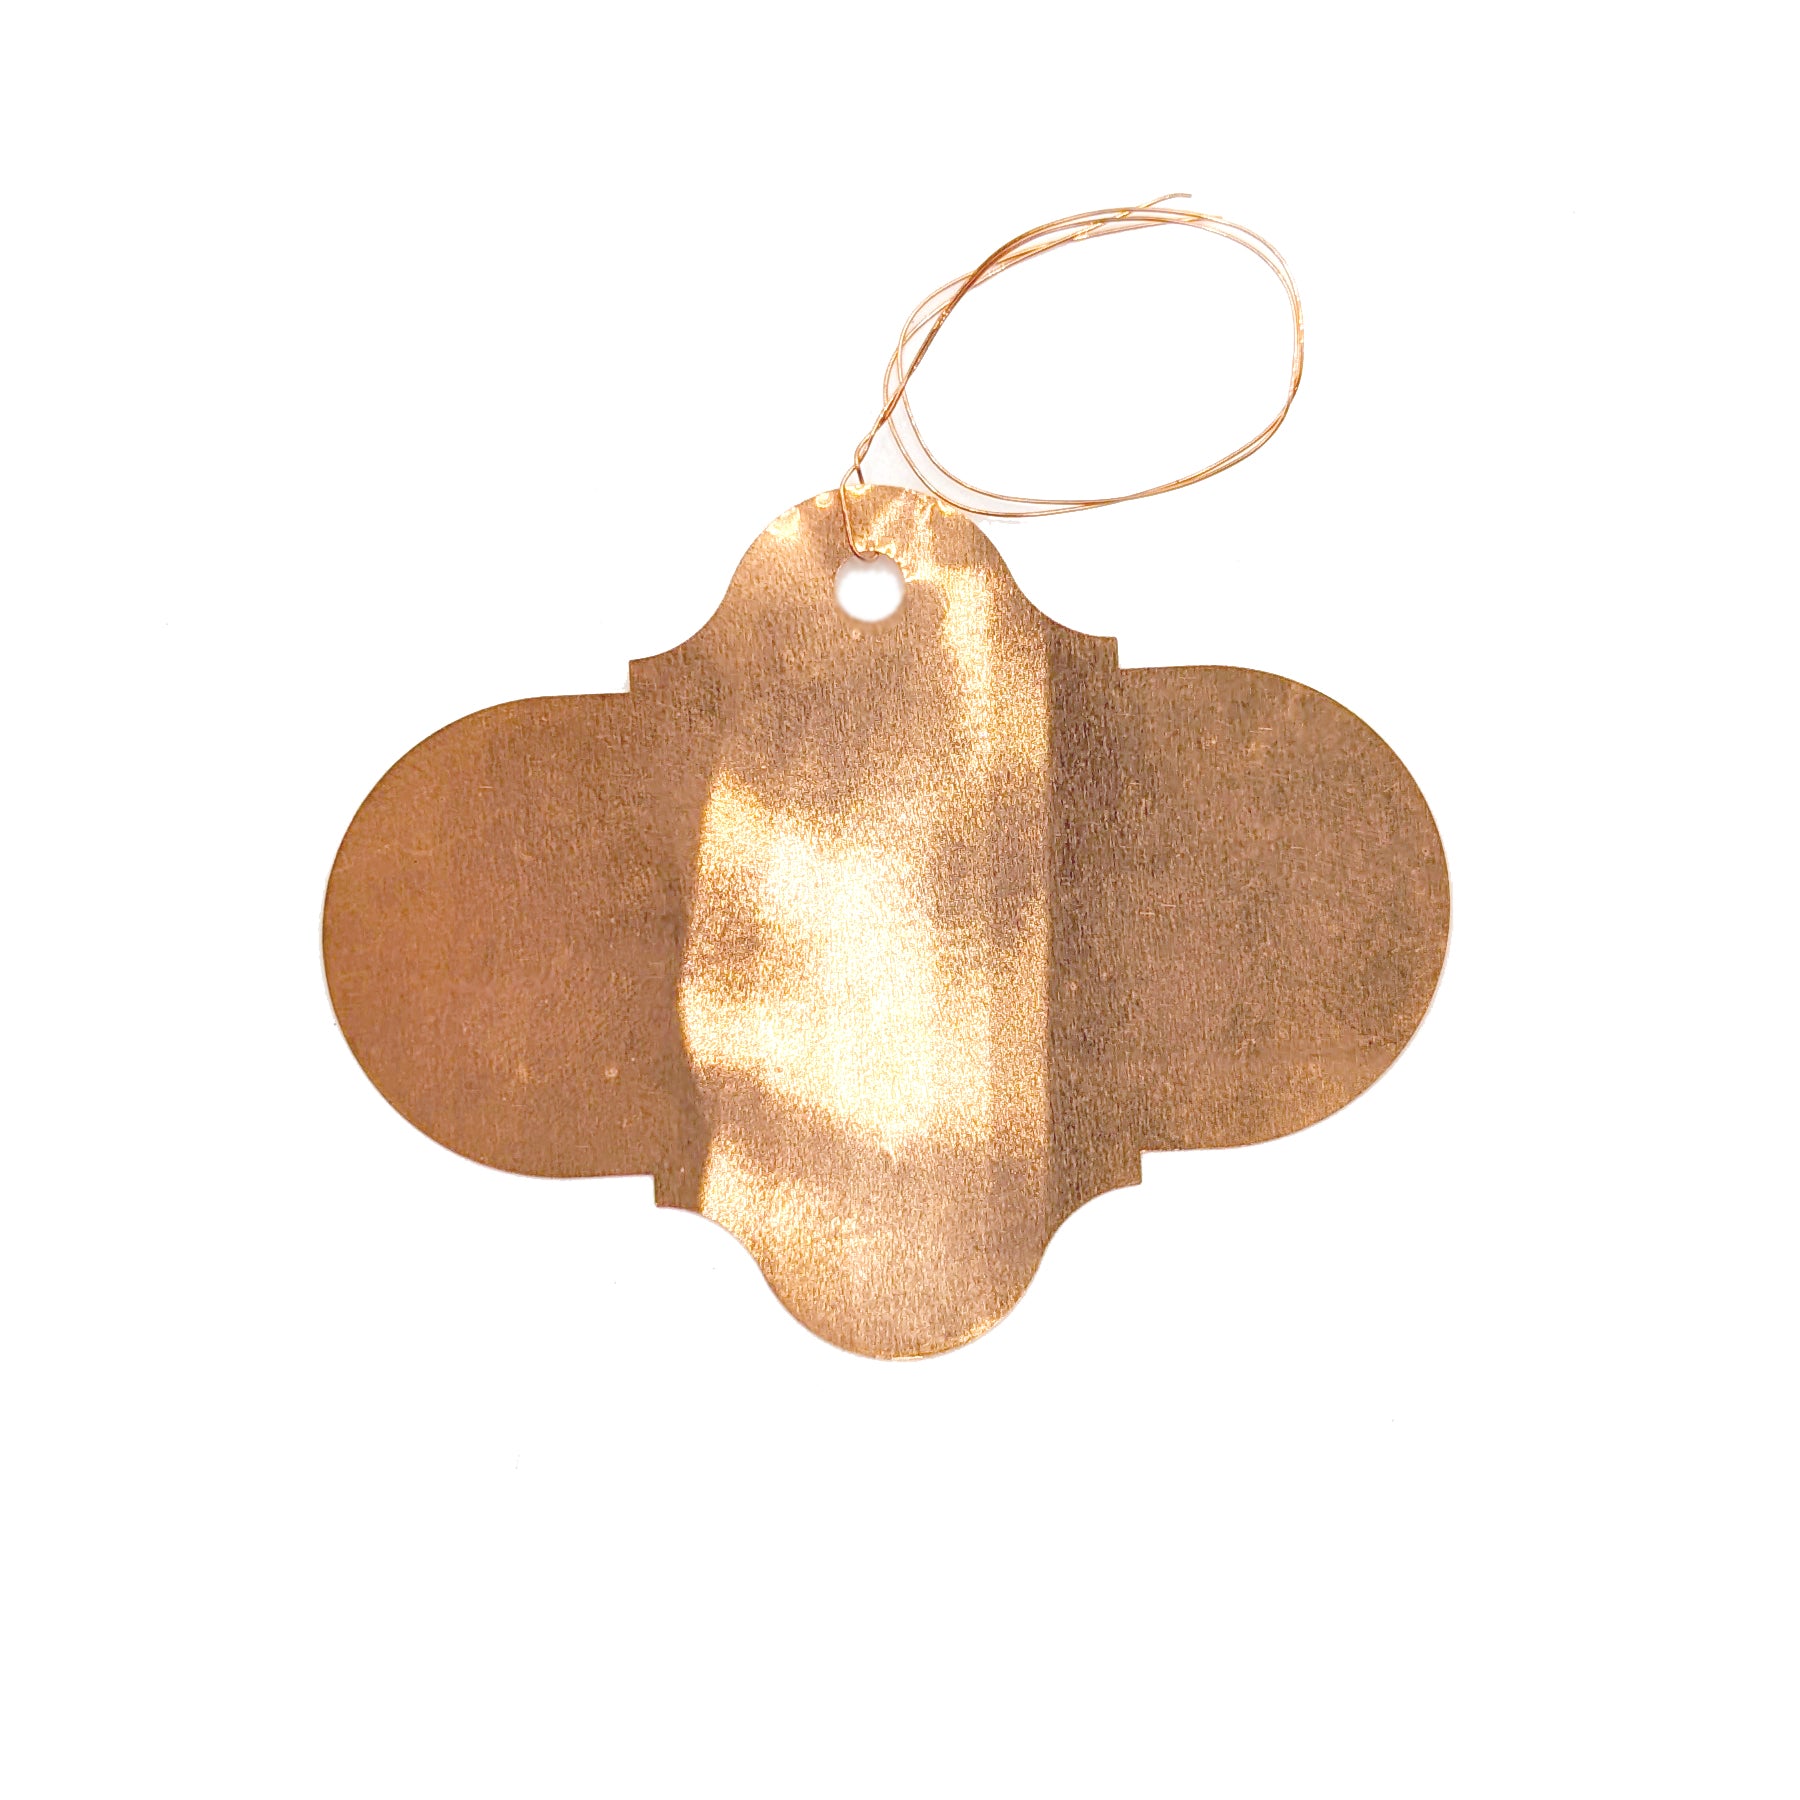 Wren Copper Plated Tags with Wire Ties (10)